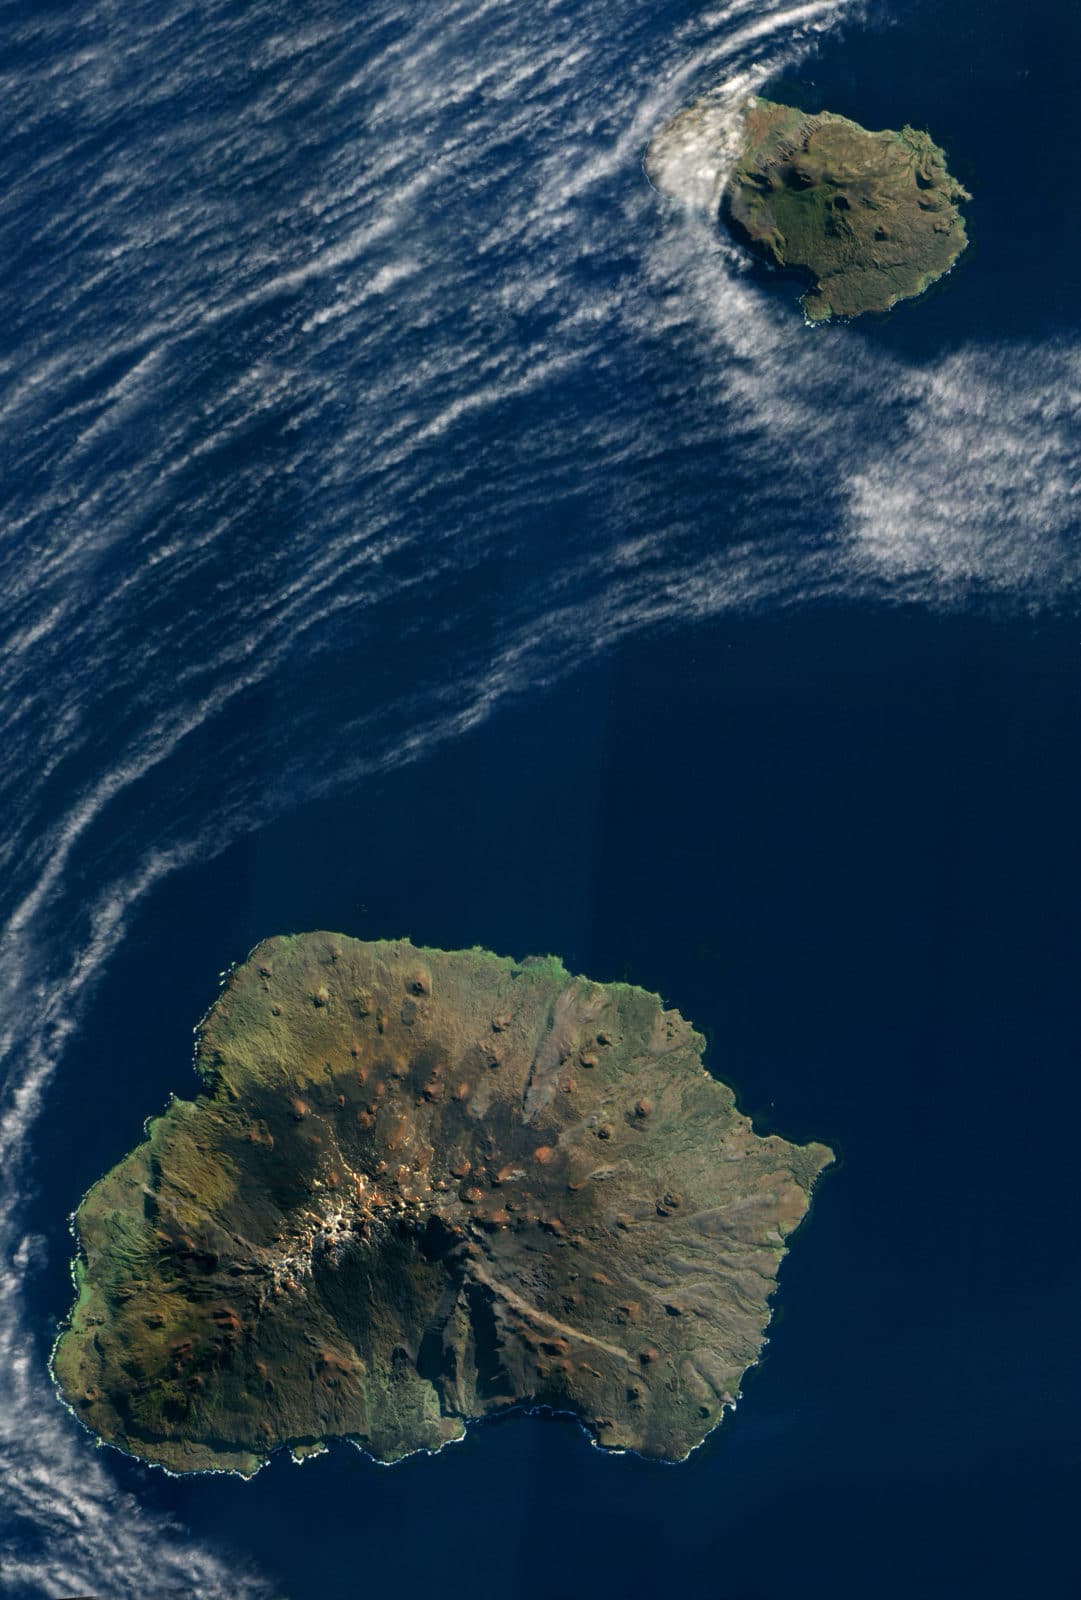 Marion is the largest of the two islands of the Prince Edward archipelago. NASA Earth Observatory image created by Jesse Allen, using EO-1 ALI data provided courtesy of the NASA EO-1 team and the United States Geological Survey. 